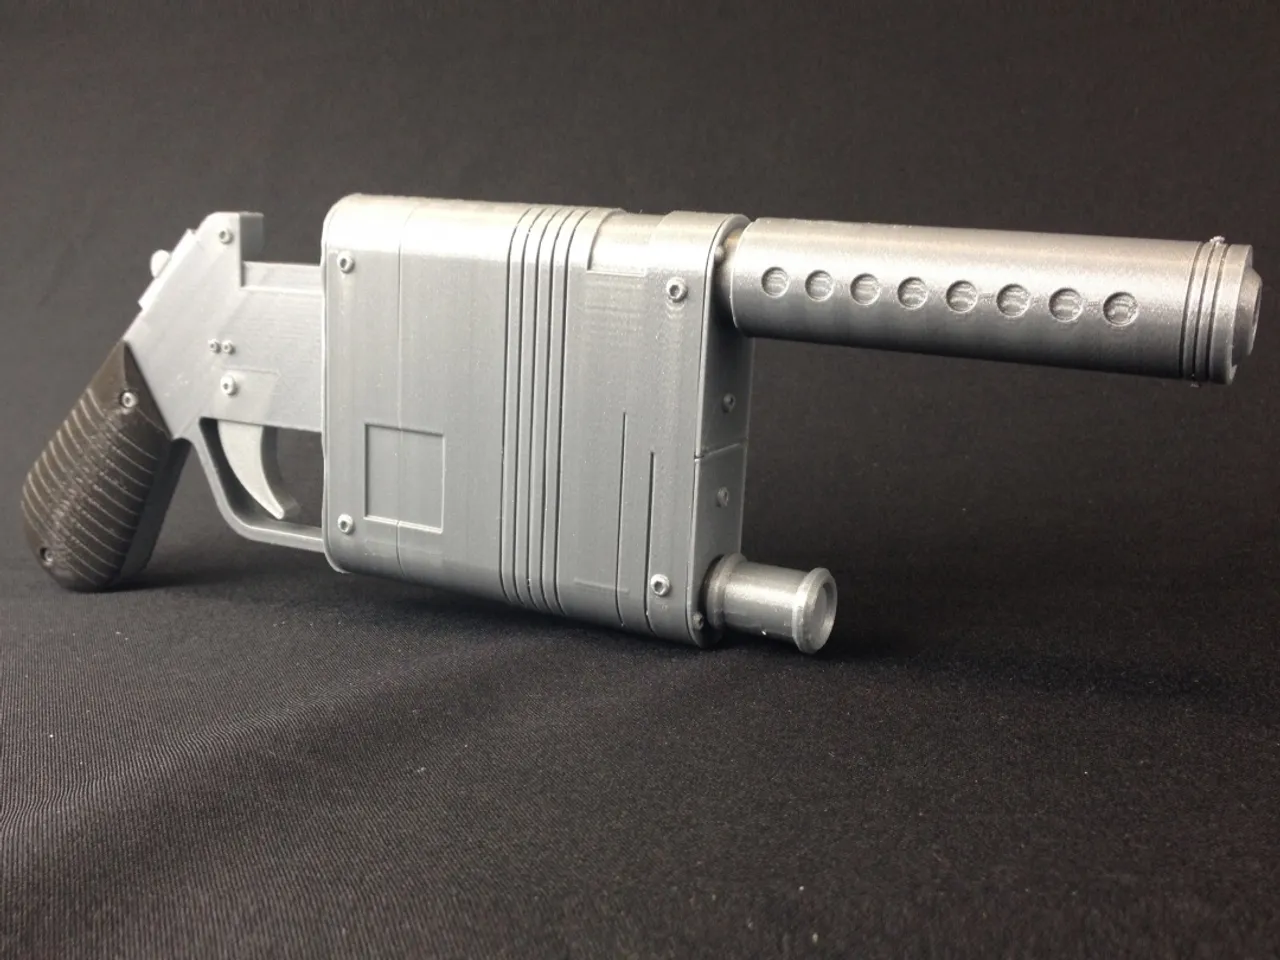 Star Wars Han solo/Rey Blaster NN-14 from Force Awakens made using LEGO parts 